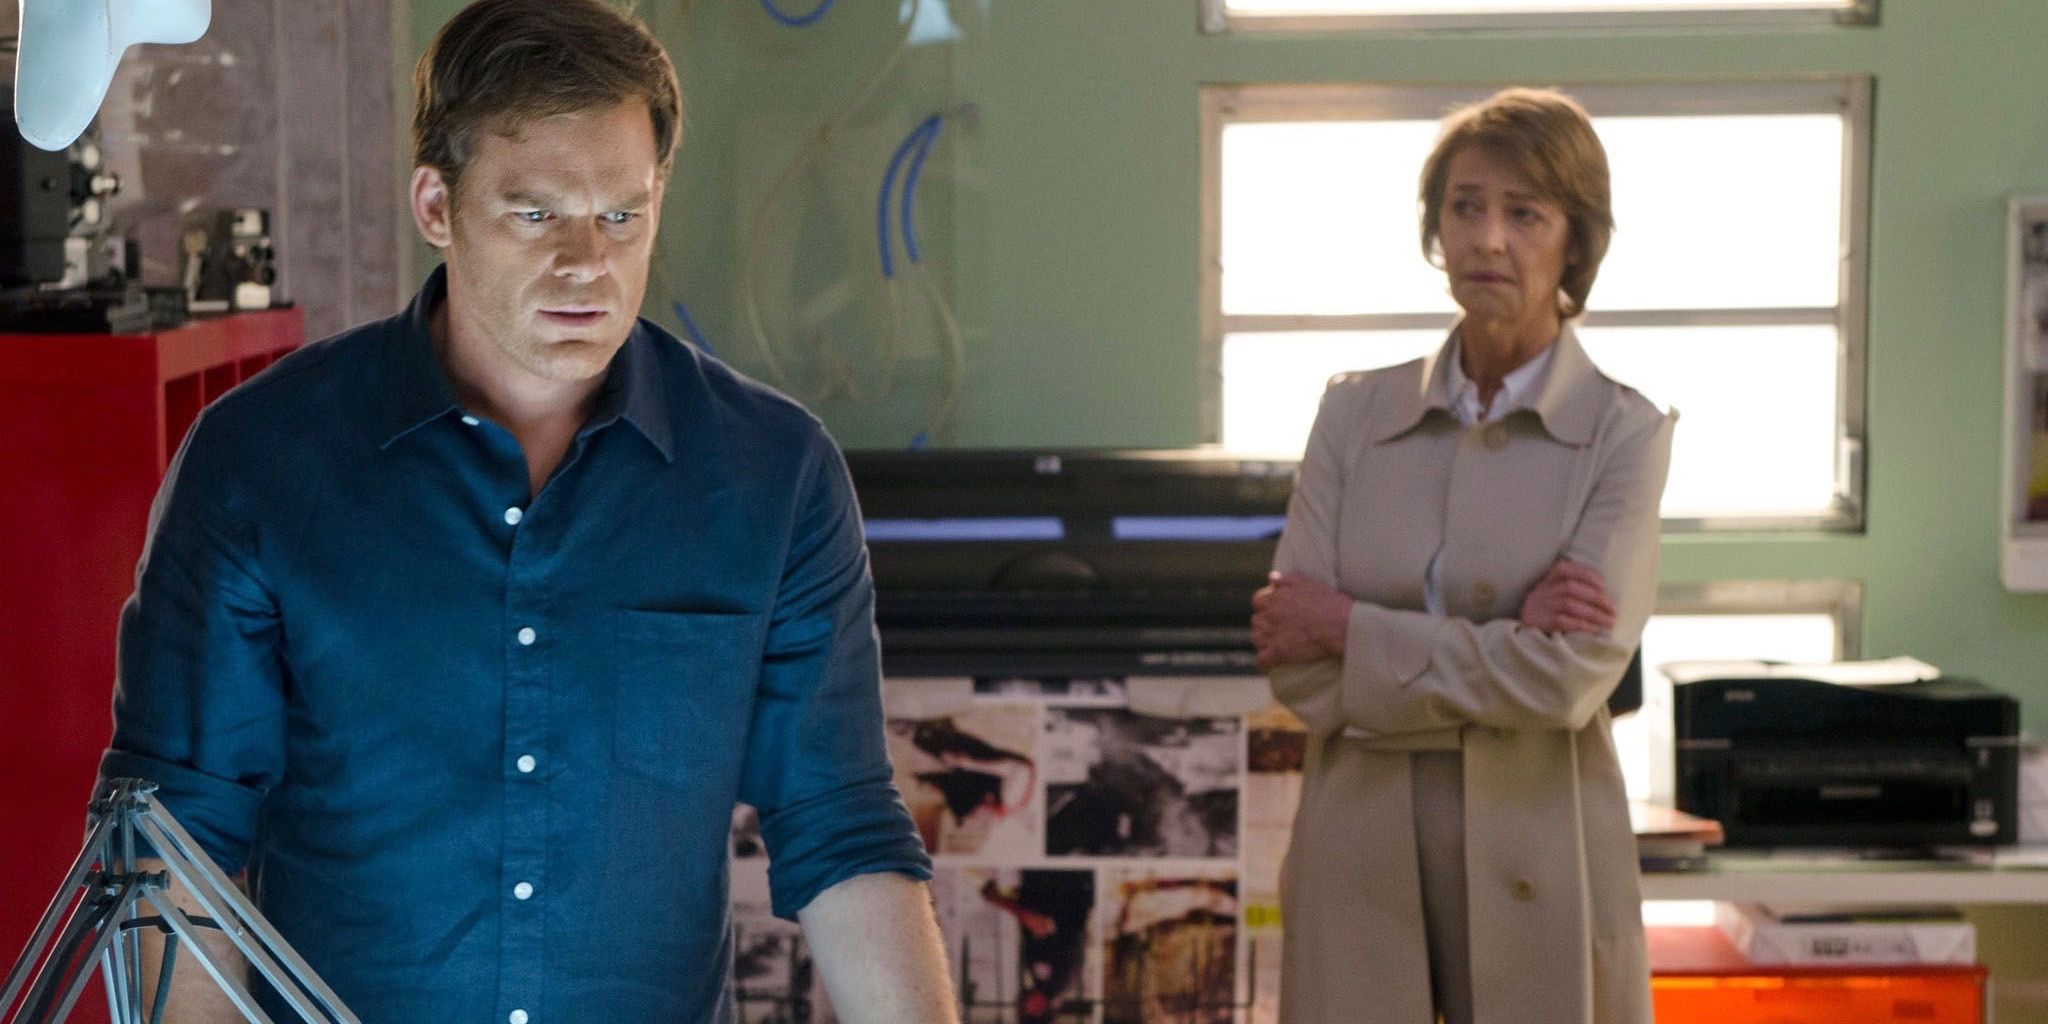 Michael C Hall as Dexter and Charlotte Rampling as Dr. Evelyn Vogel in Dexter